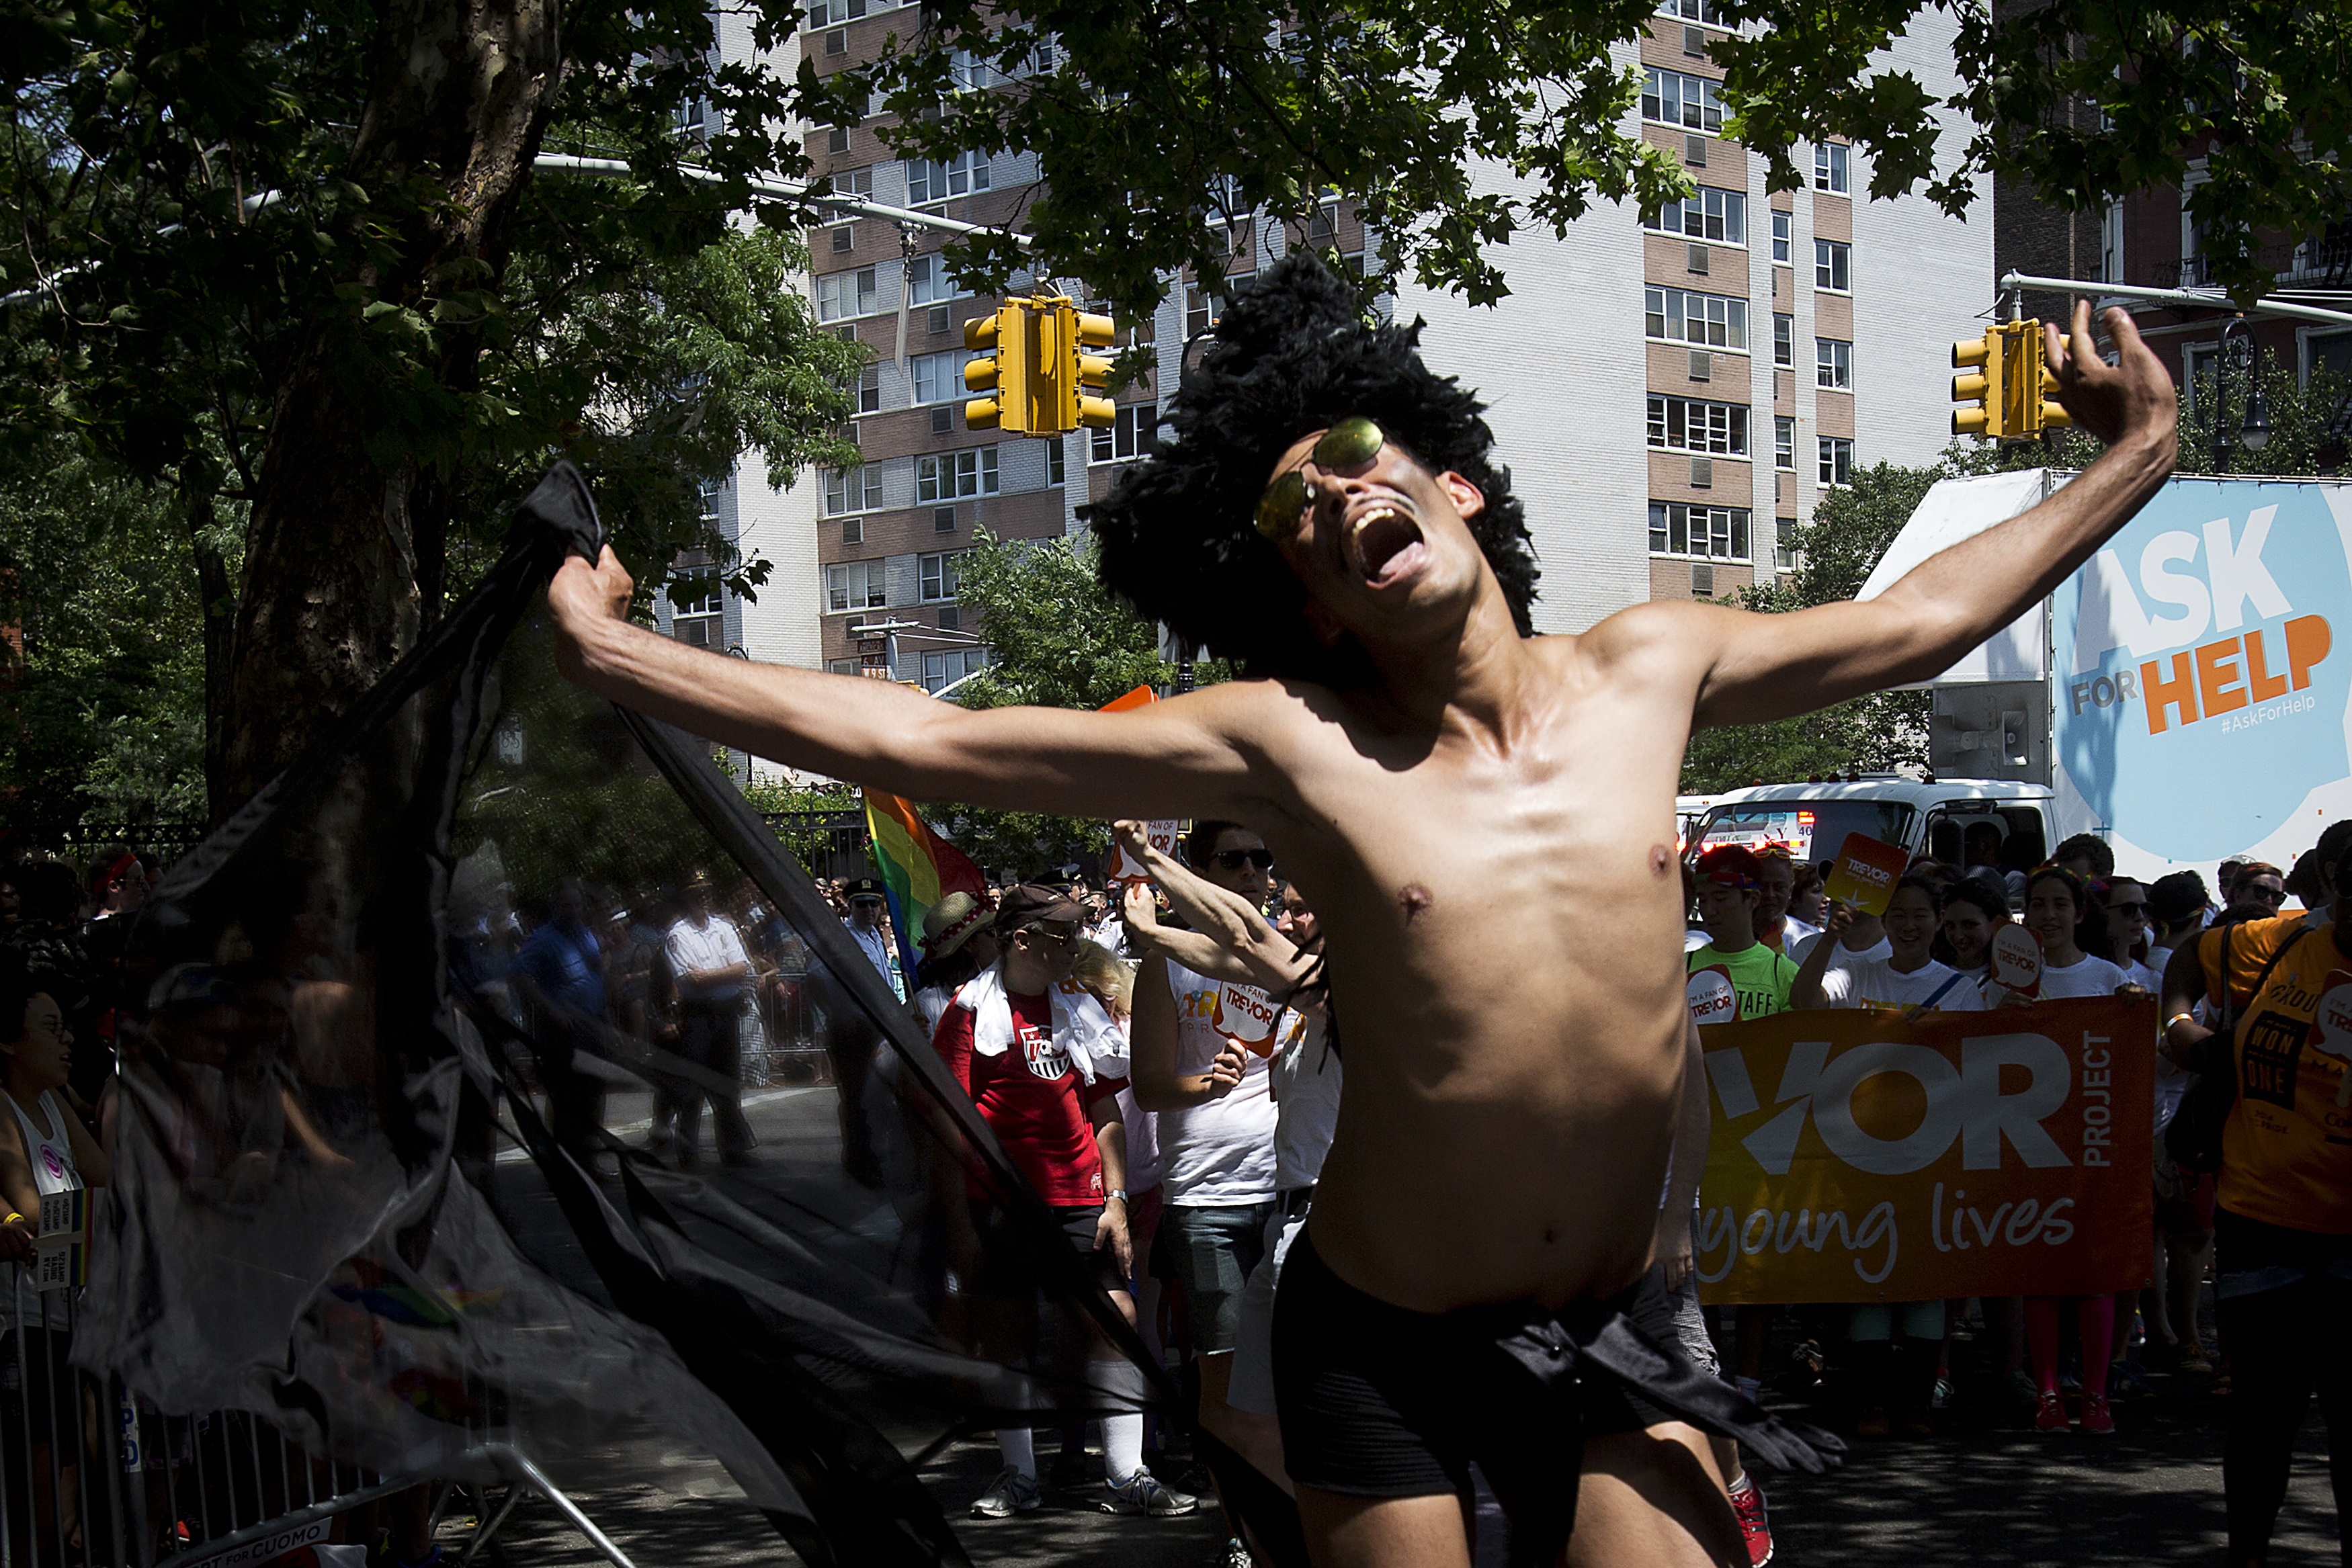 A participant takes part in the annual Gay Pride Parade on Christopher Street in New York City, June 29, 2014.